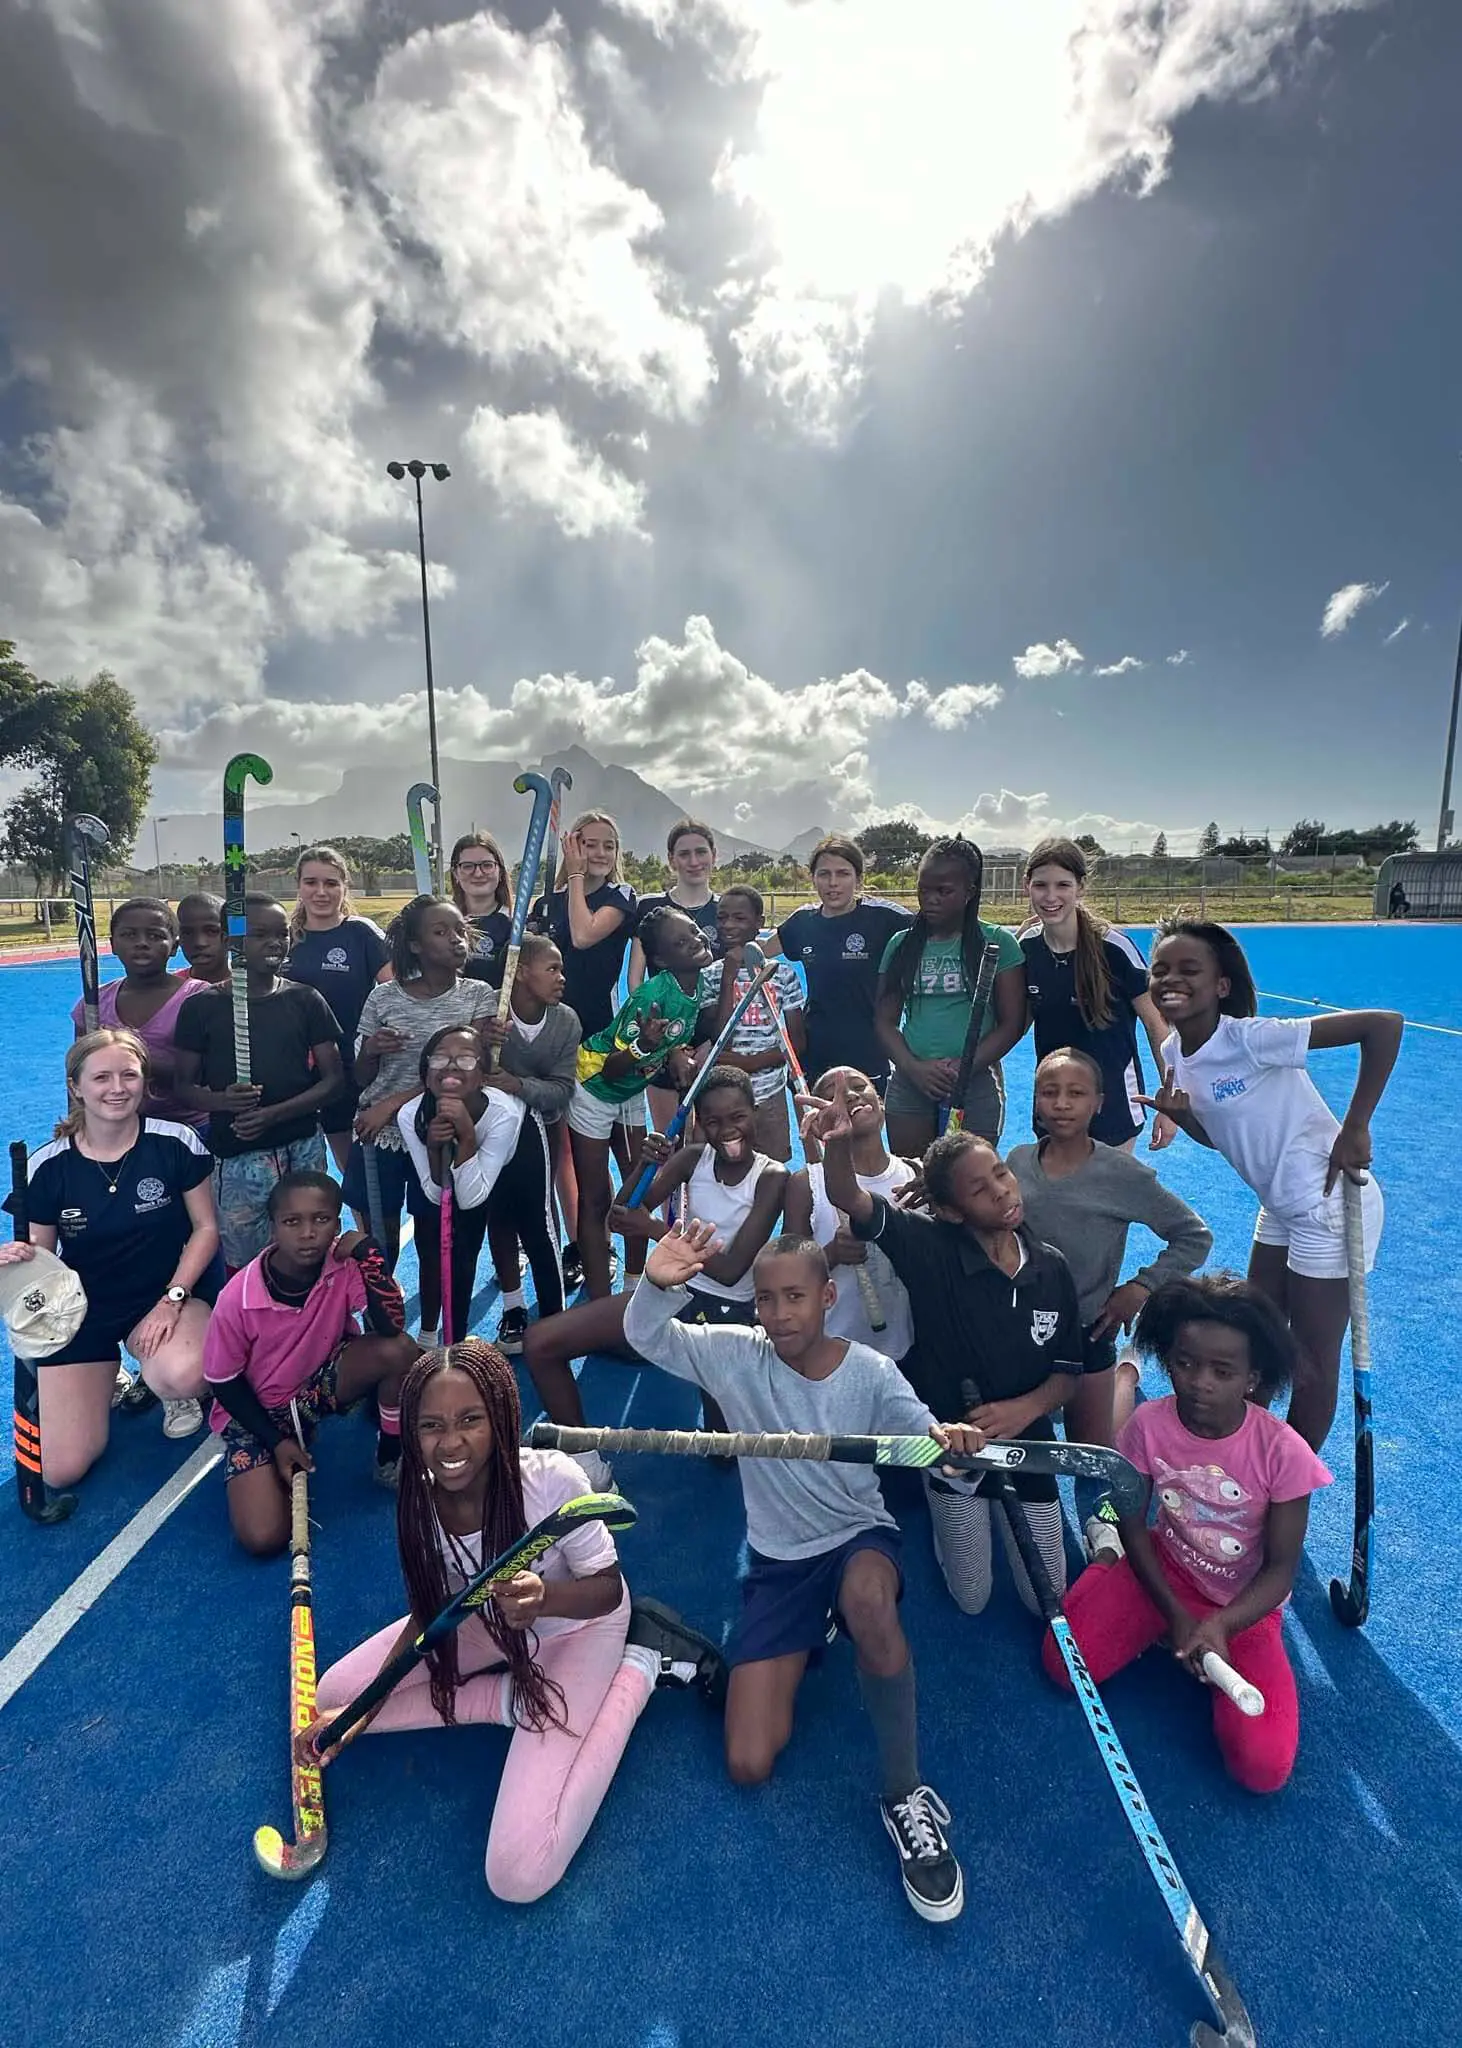 Ibstock Place School pupils had an amazing trip to sunny South Africa over half term, playing matches against local schools.